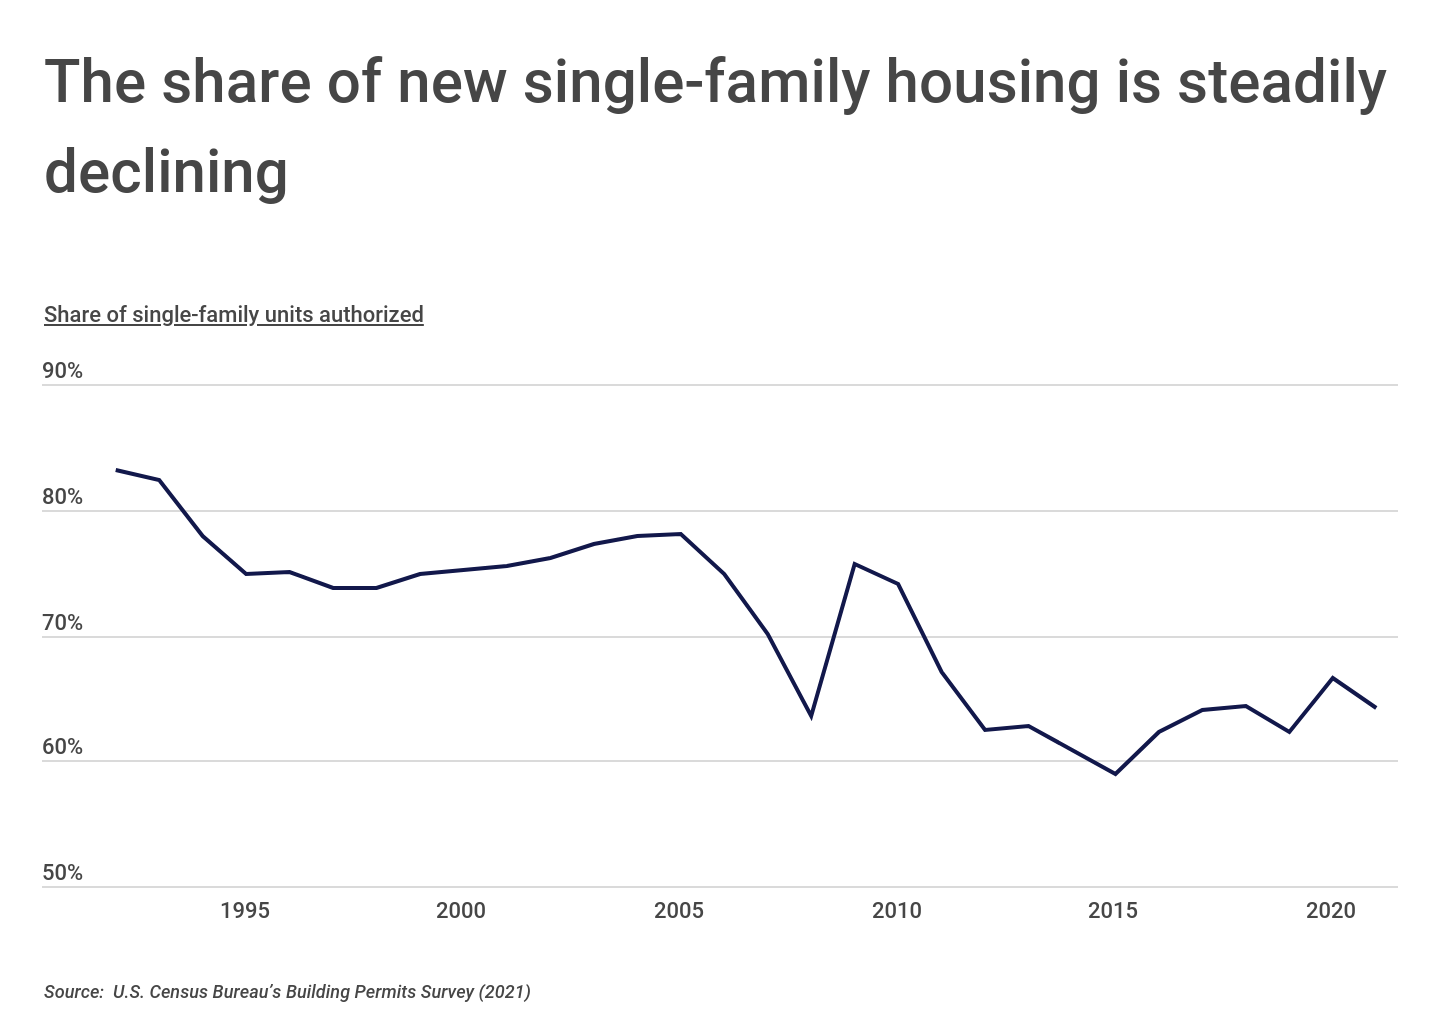 Chart2_The share of new single-family housing is steadily declining